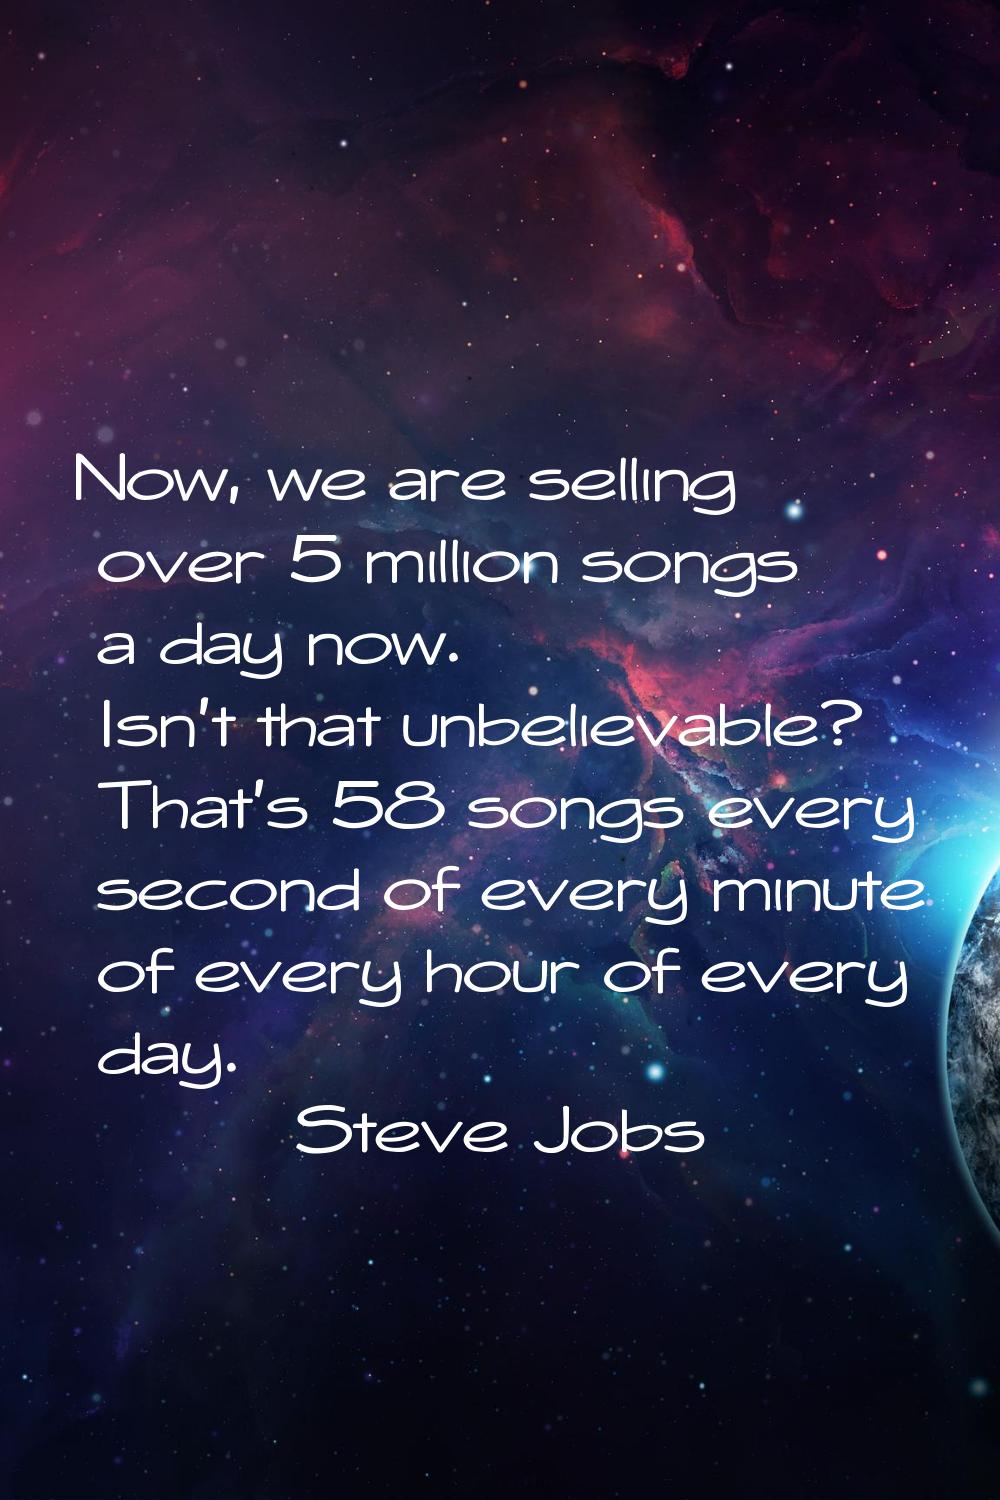 Now, we are selling over 5 million songs a day now. Isn't that unbelievable? That's 58 songs every 